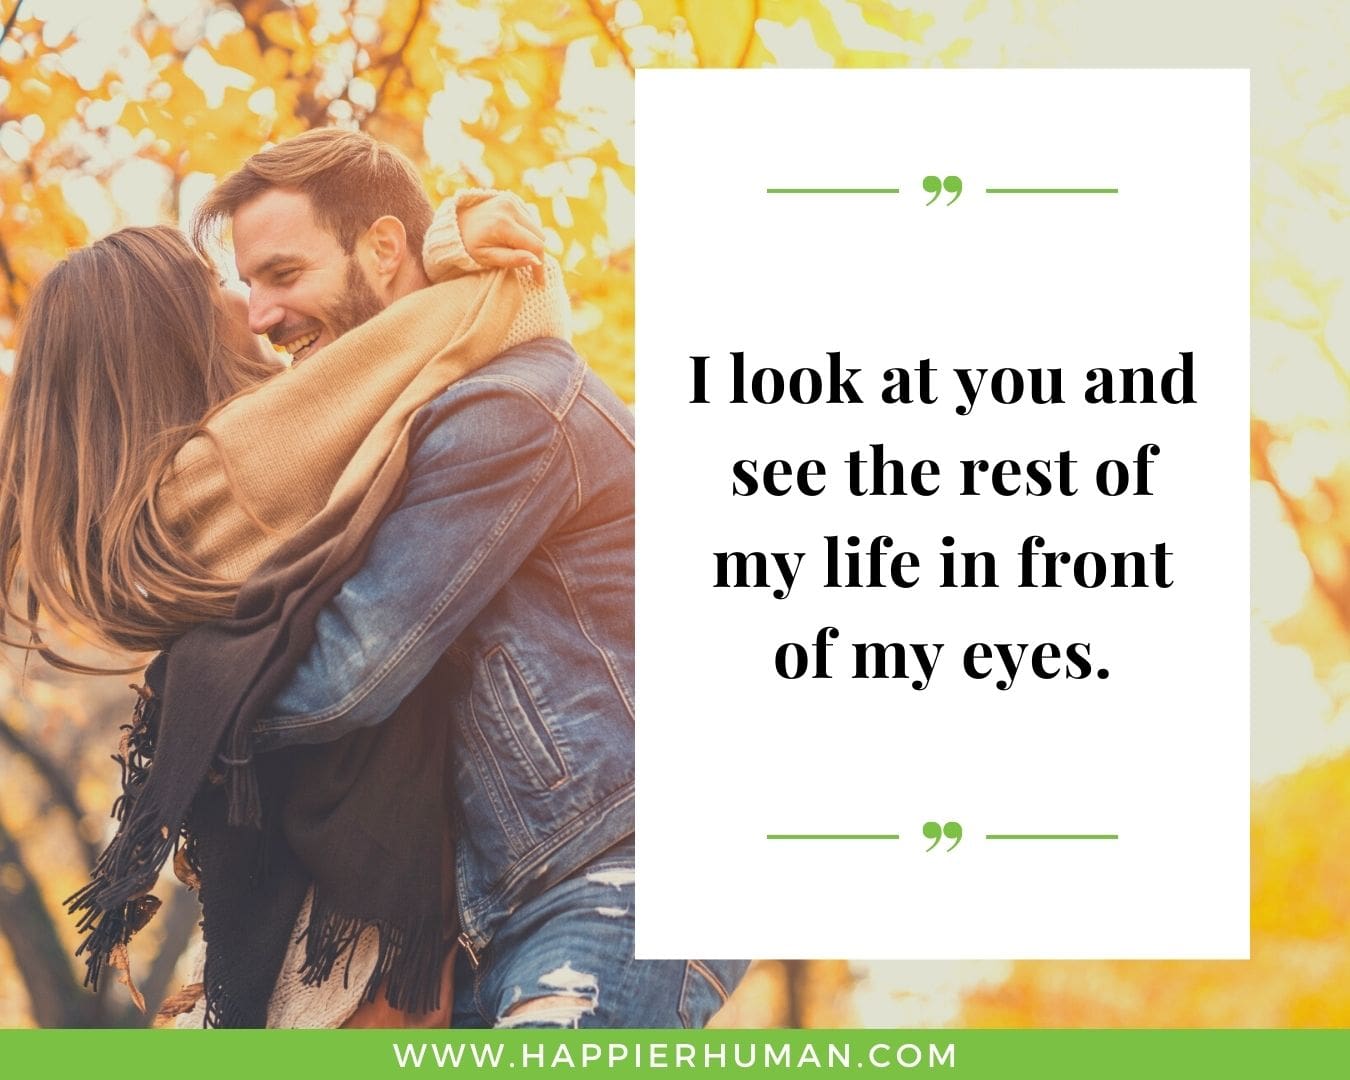 Sweet and Romantic Love Quotes for Her - “I look at you and see the rest of my life in front of my eyes.”